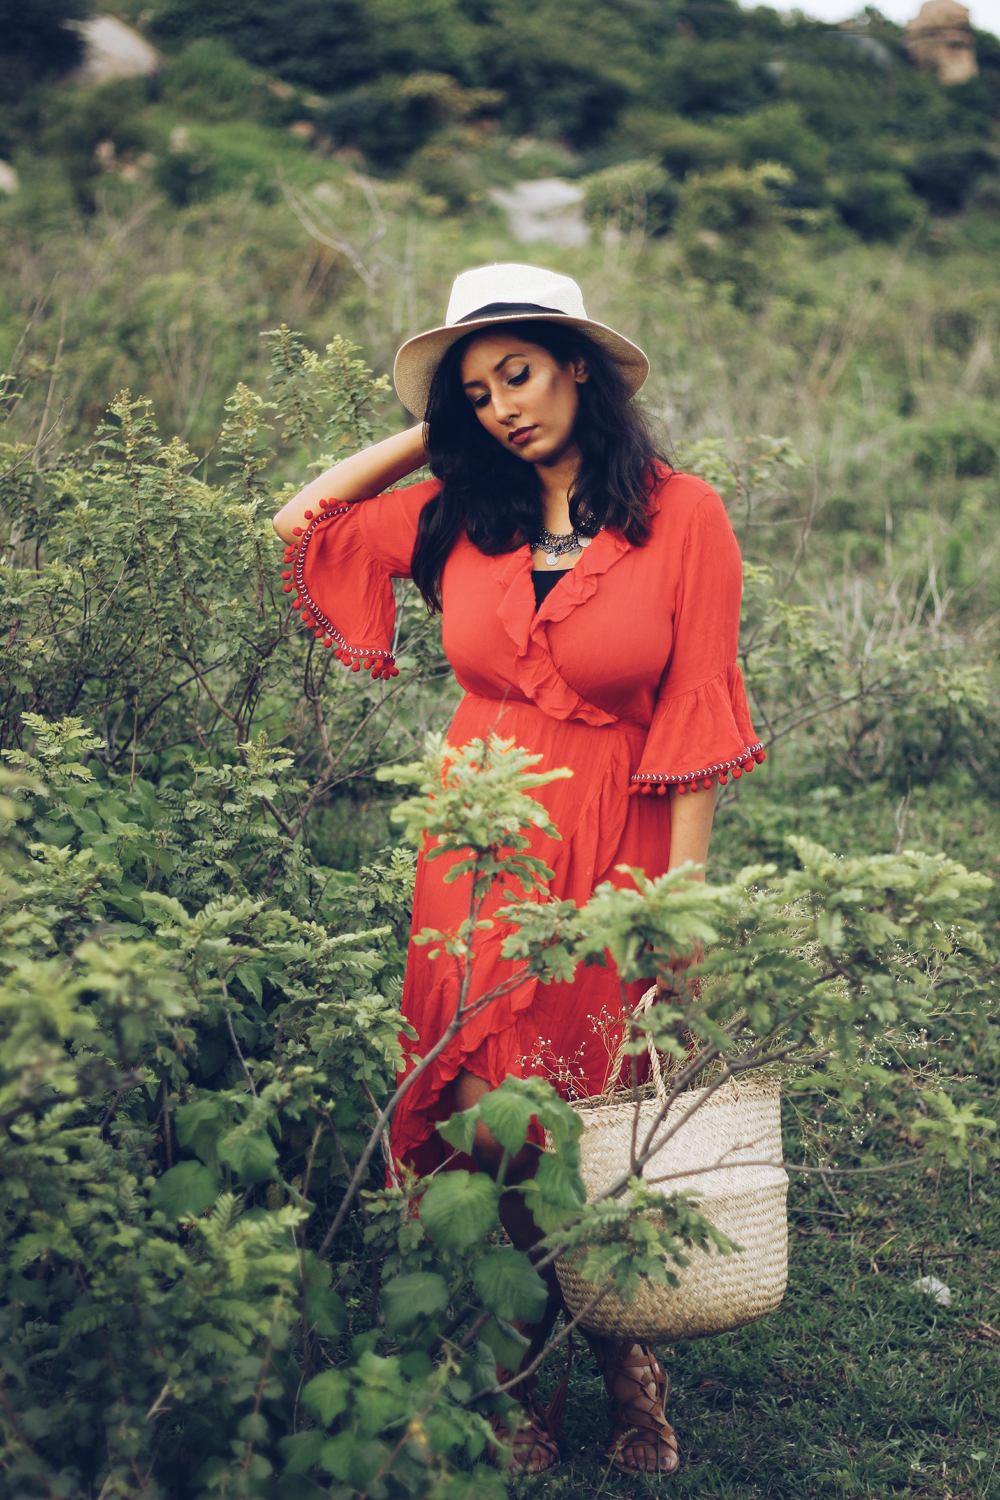 Red Maxi ; Ruflles ; Tan ; Lookbook ; Outfit ; fashion photography ; Red Lips ; Zaful Maxi ; ootd ; fall look ; Country fashion ; Hat ; Monsoon Story ; Flowers ; sunset ; strong ; Dark ; summer fashion ; summer outfit ; spring ; fall 18 ; Hyderabad ; Editorial ; Naznin ; Naznin Suhaer ; dusky; model ; indian blogger ; hyderabad fashion bloggers ; hyderabad bloggers ; hyderabad fashion blogger ; I Dress for the Applause ; 